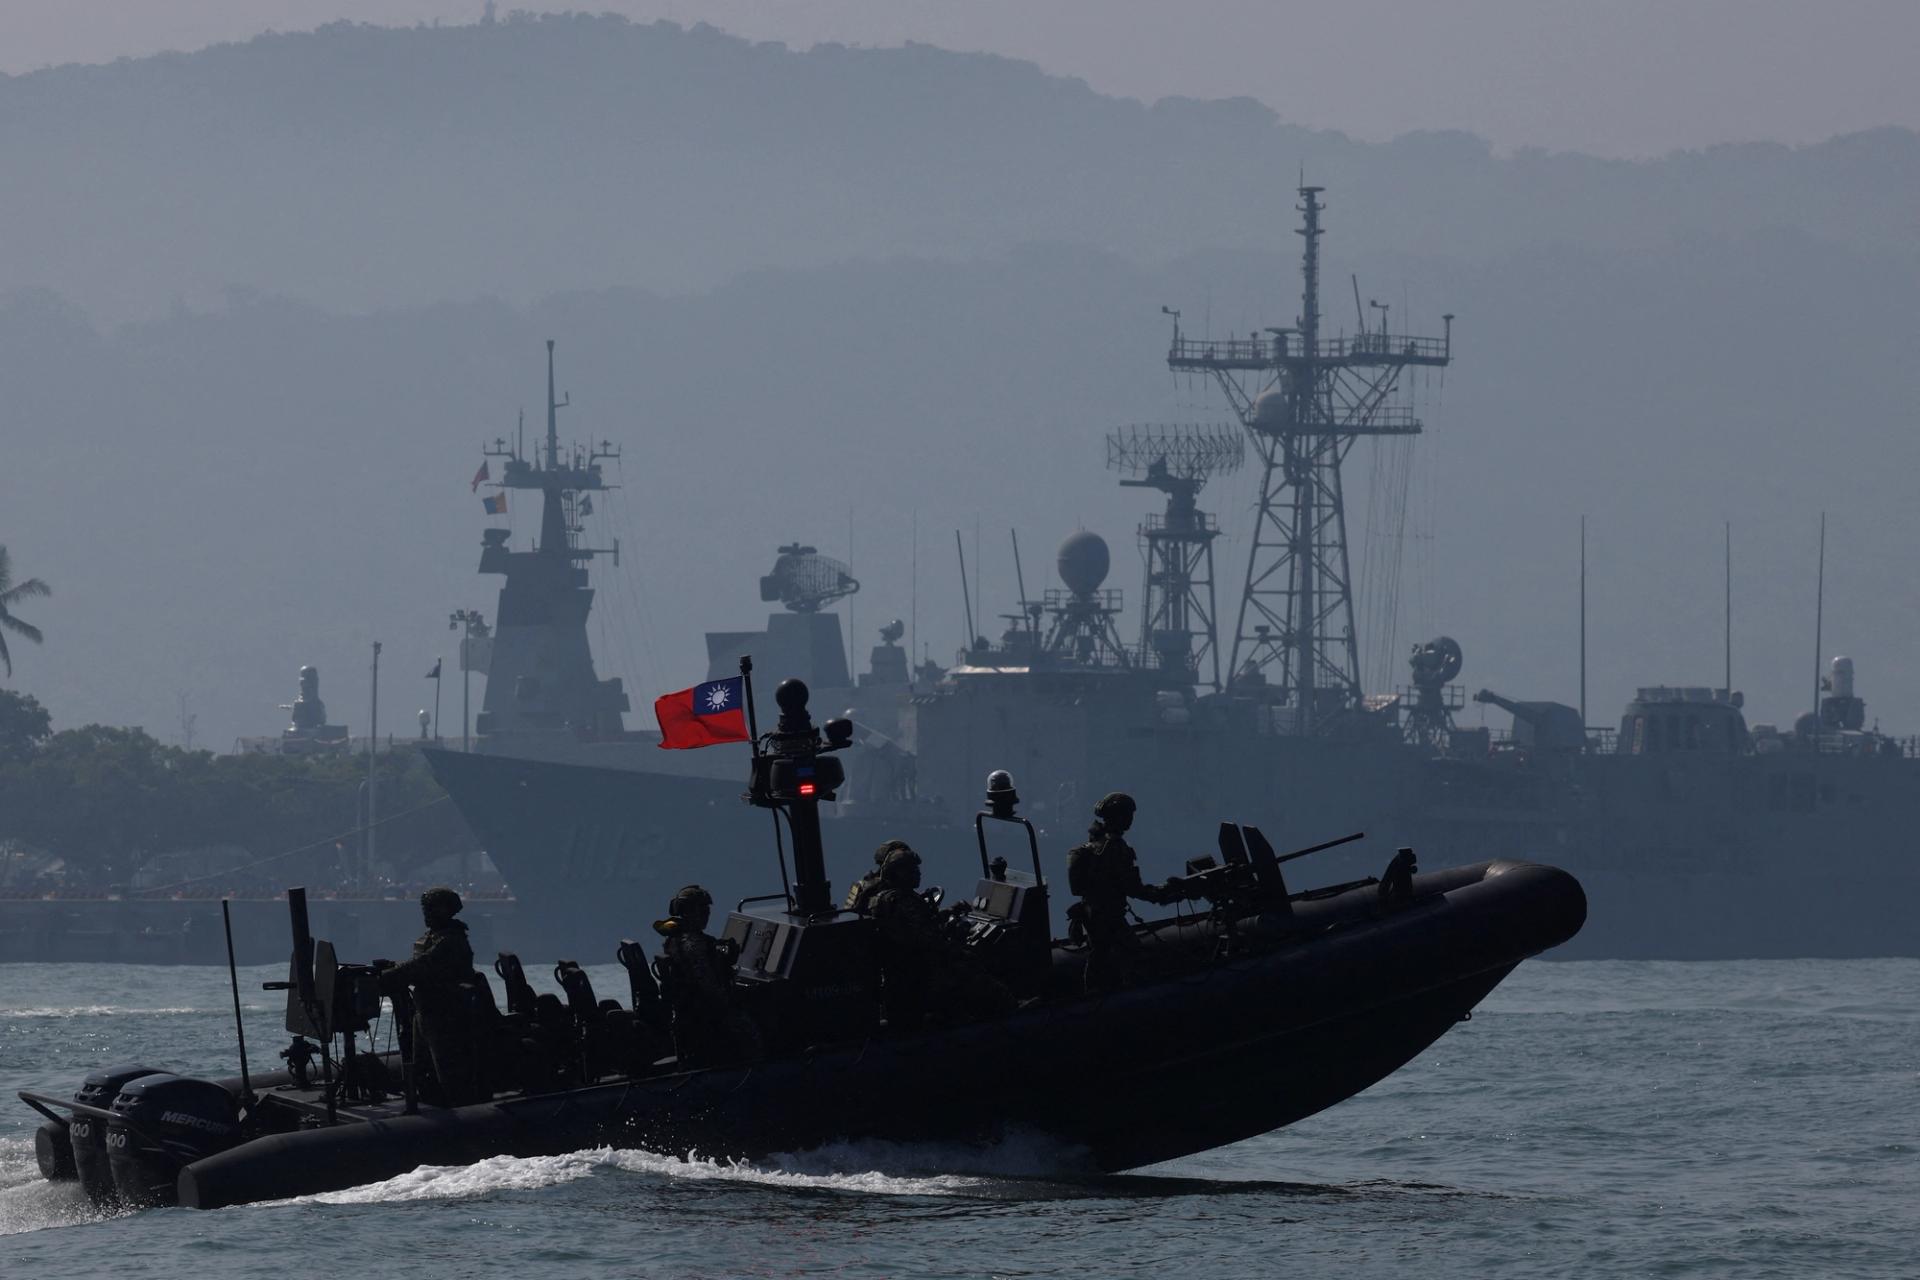 Members of Taiwan's Navy navigate onboard a special operation boat during a drill part of a demonstration for the media, to show combat readiness ahead of the Lunar New Year holidays, on the waters near a military base in Kaohsiung, Taiwan